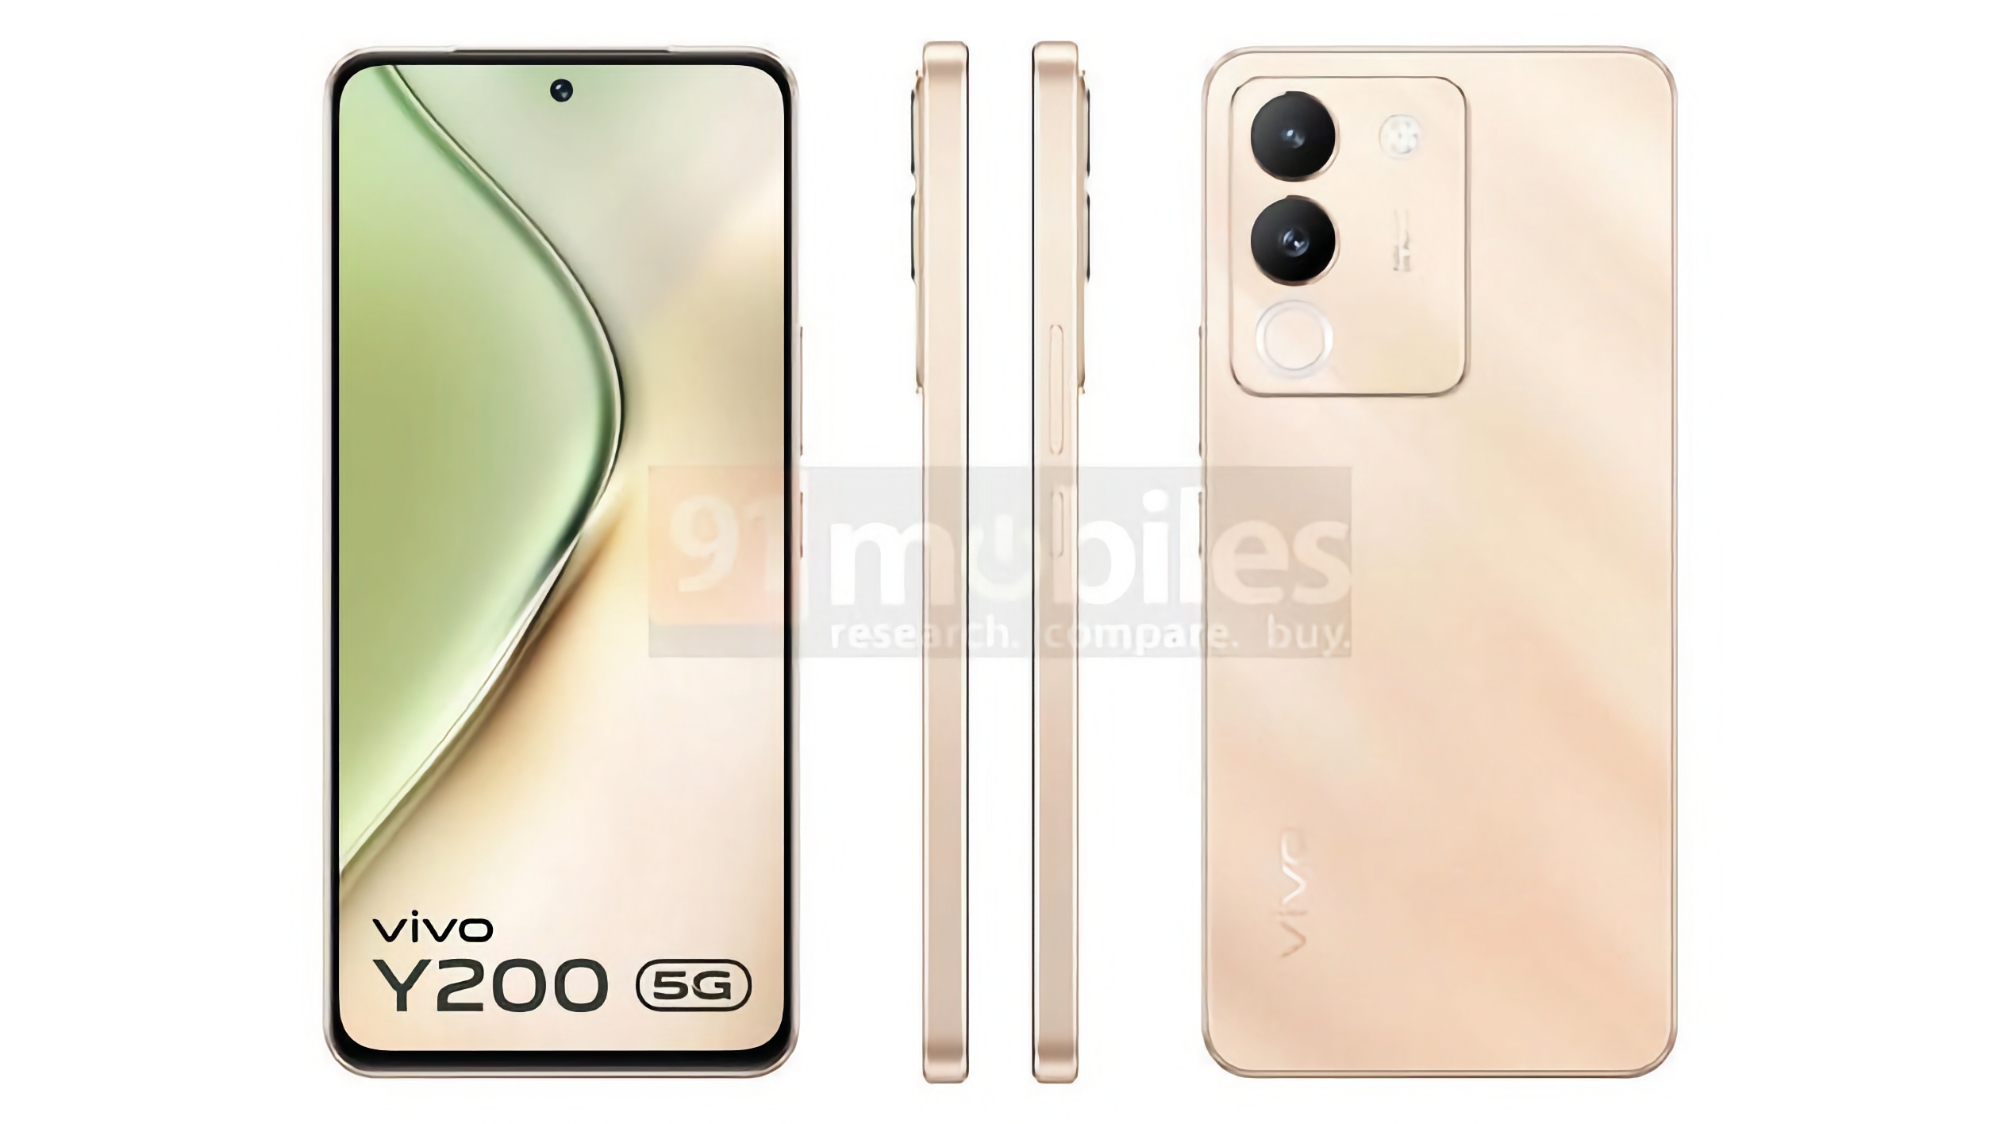 How much will the vivo Y200 with Snapdragon 4 Gen 1 chip and 120Hz AMOLED display cost